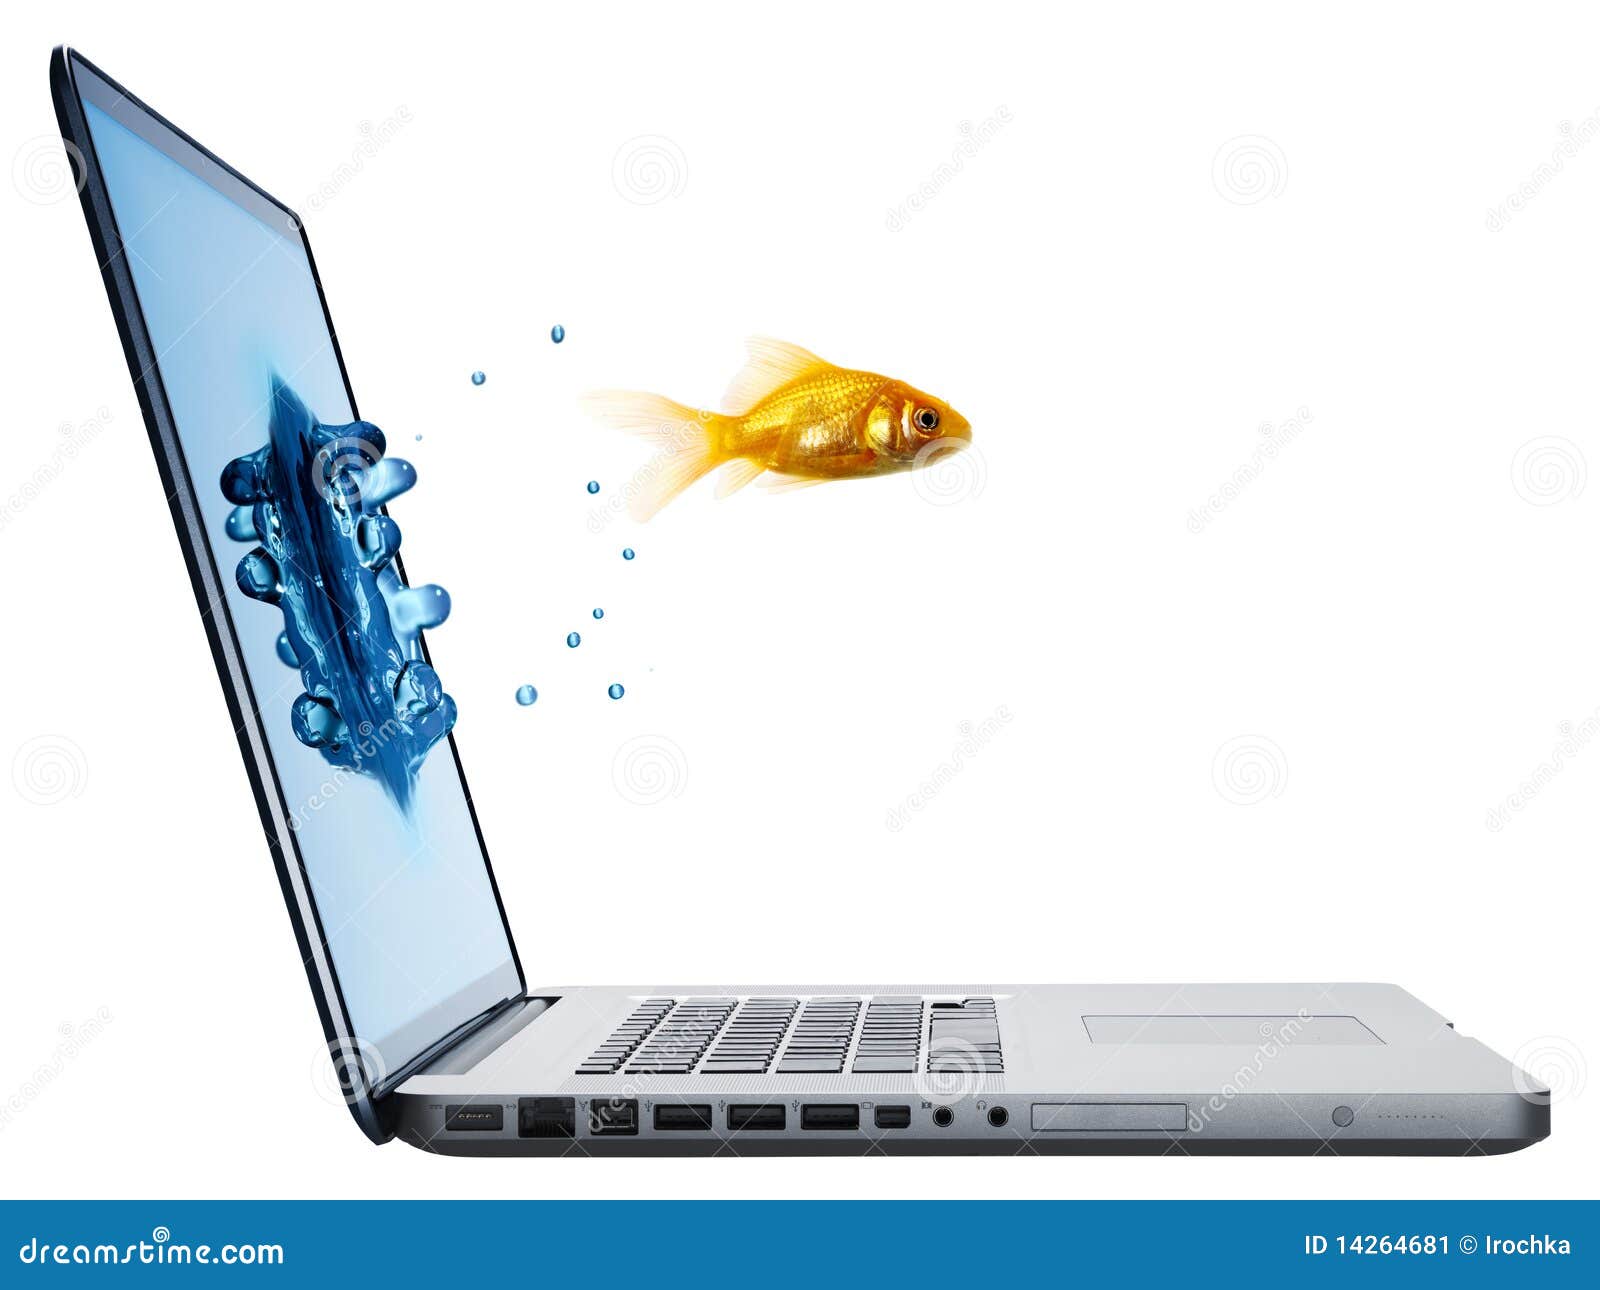 goldfish leaping from laptop